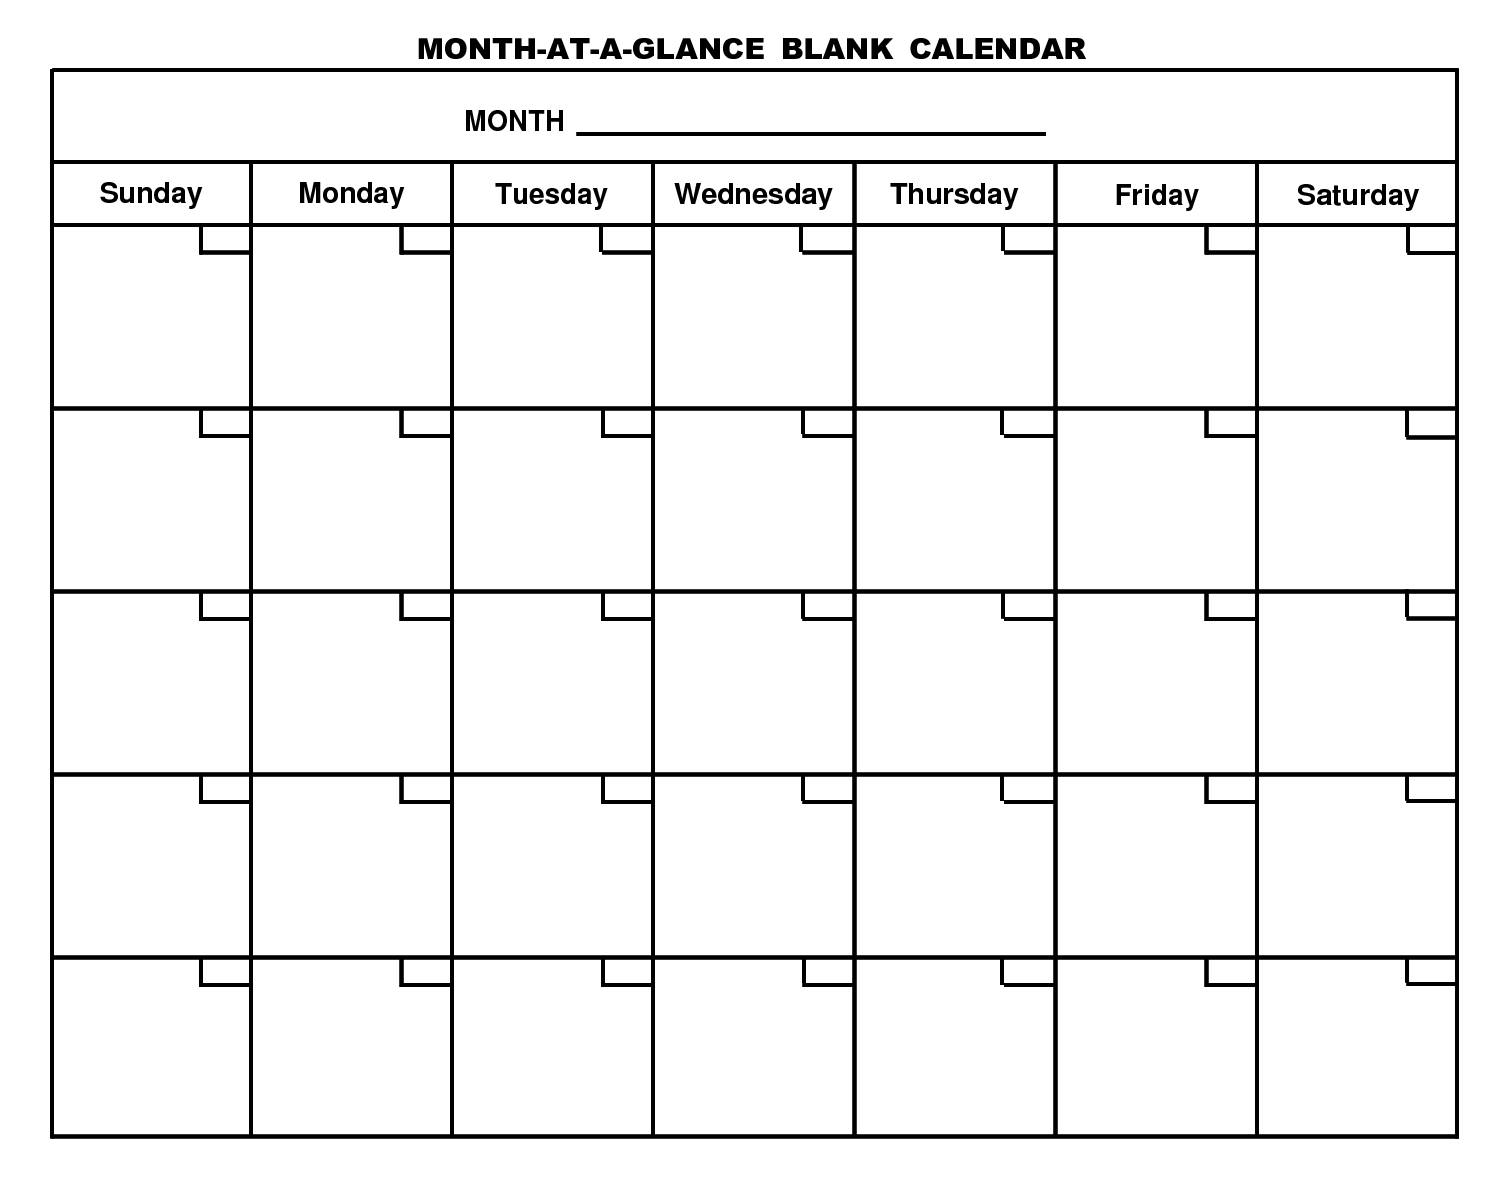 Pin By Stacy Tangren On Work | Free Printable Calendar Month At A Glance Blank Calendar